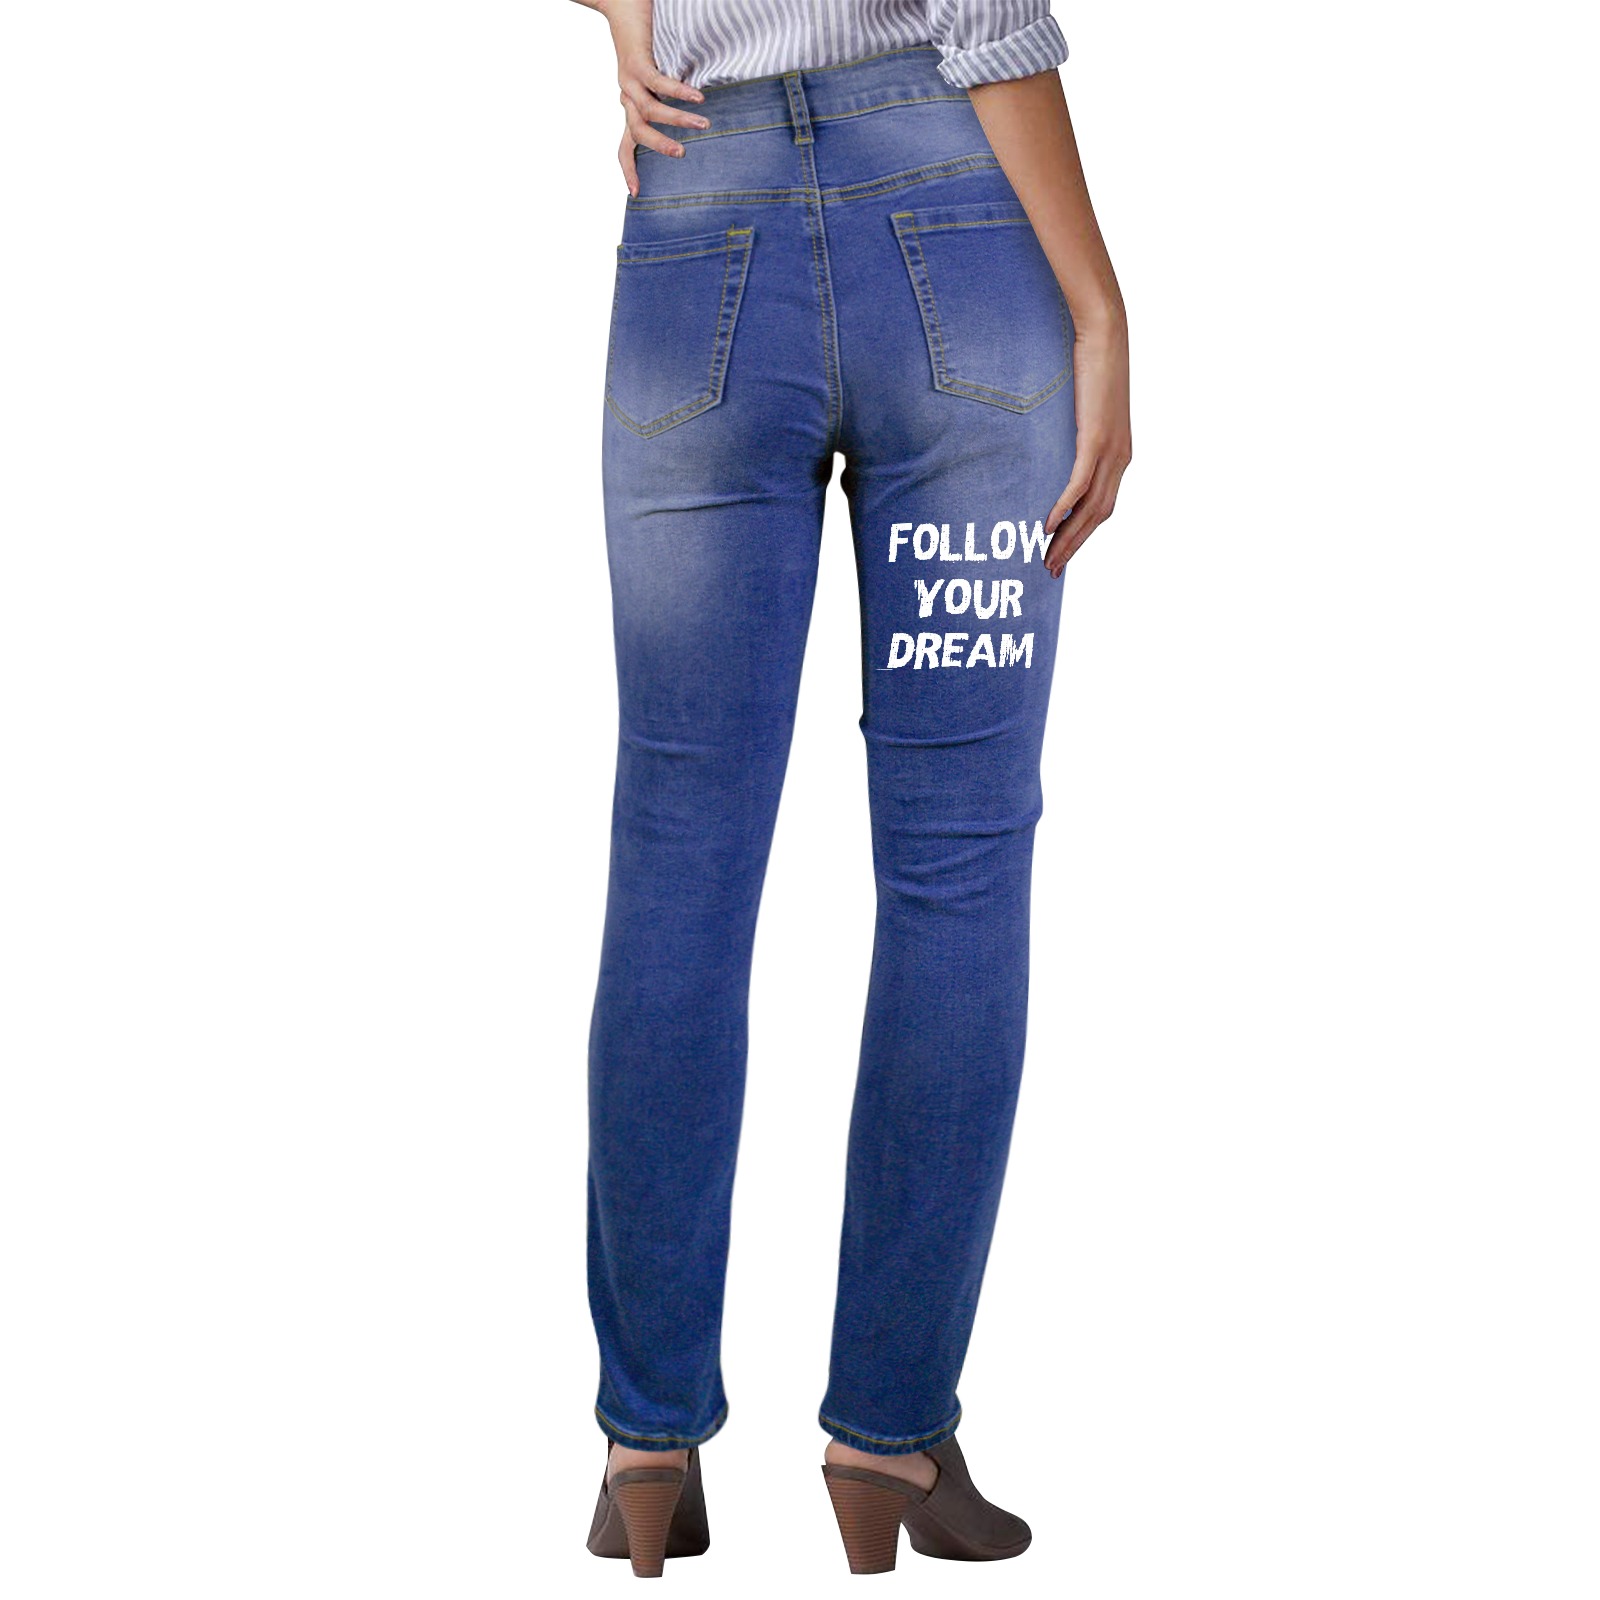 Follow your dream cool awesome white text. Women's Jeans (Back Printing)